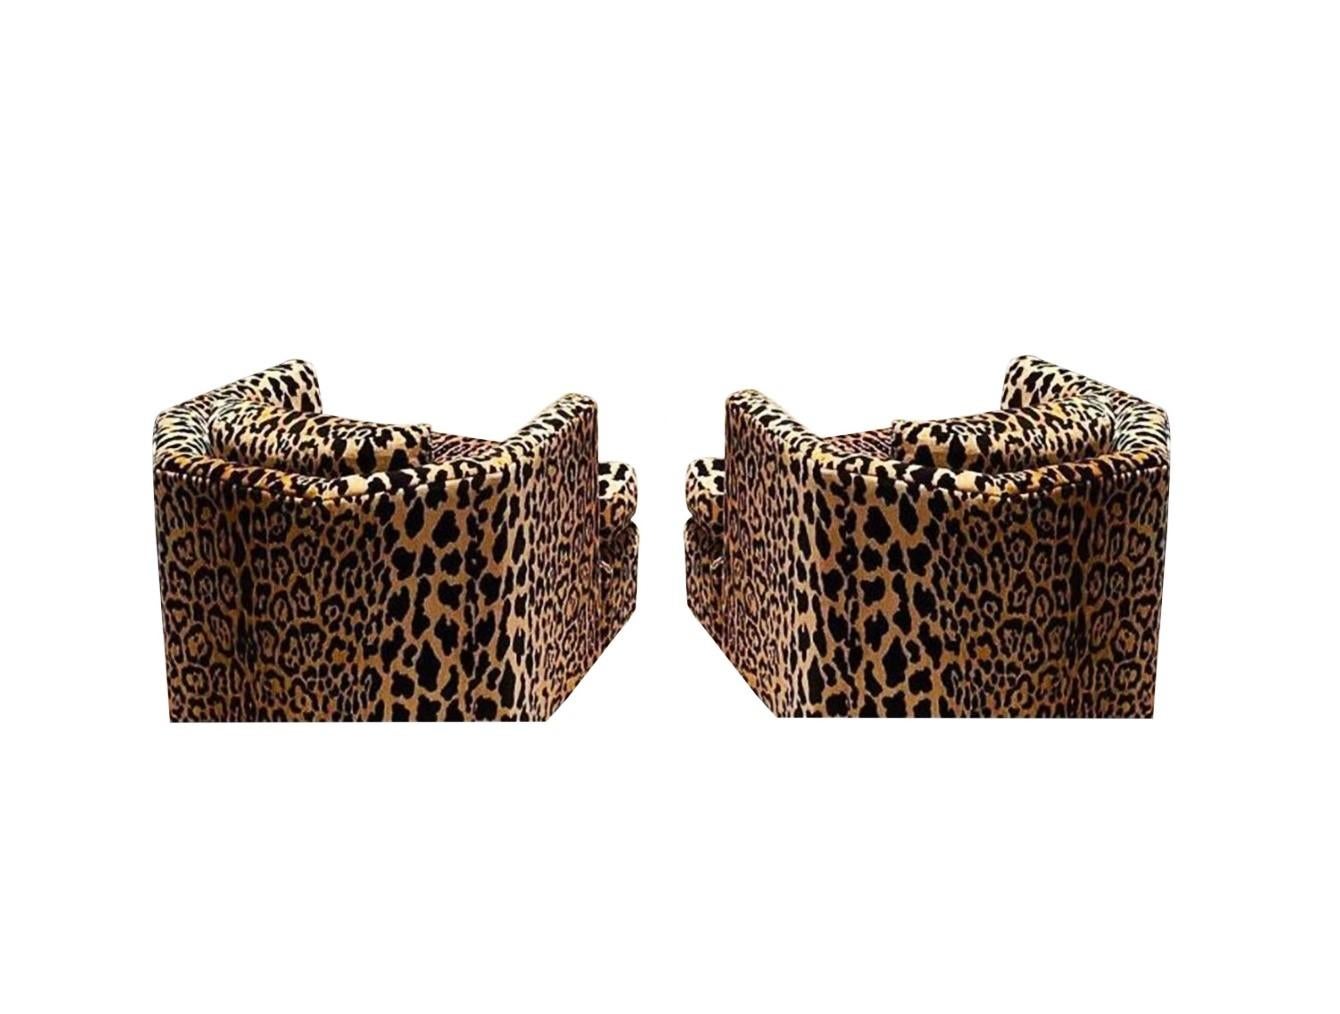 Late 20th Century Pair of Hexagonal Barrel Back Chairs in Leopard